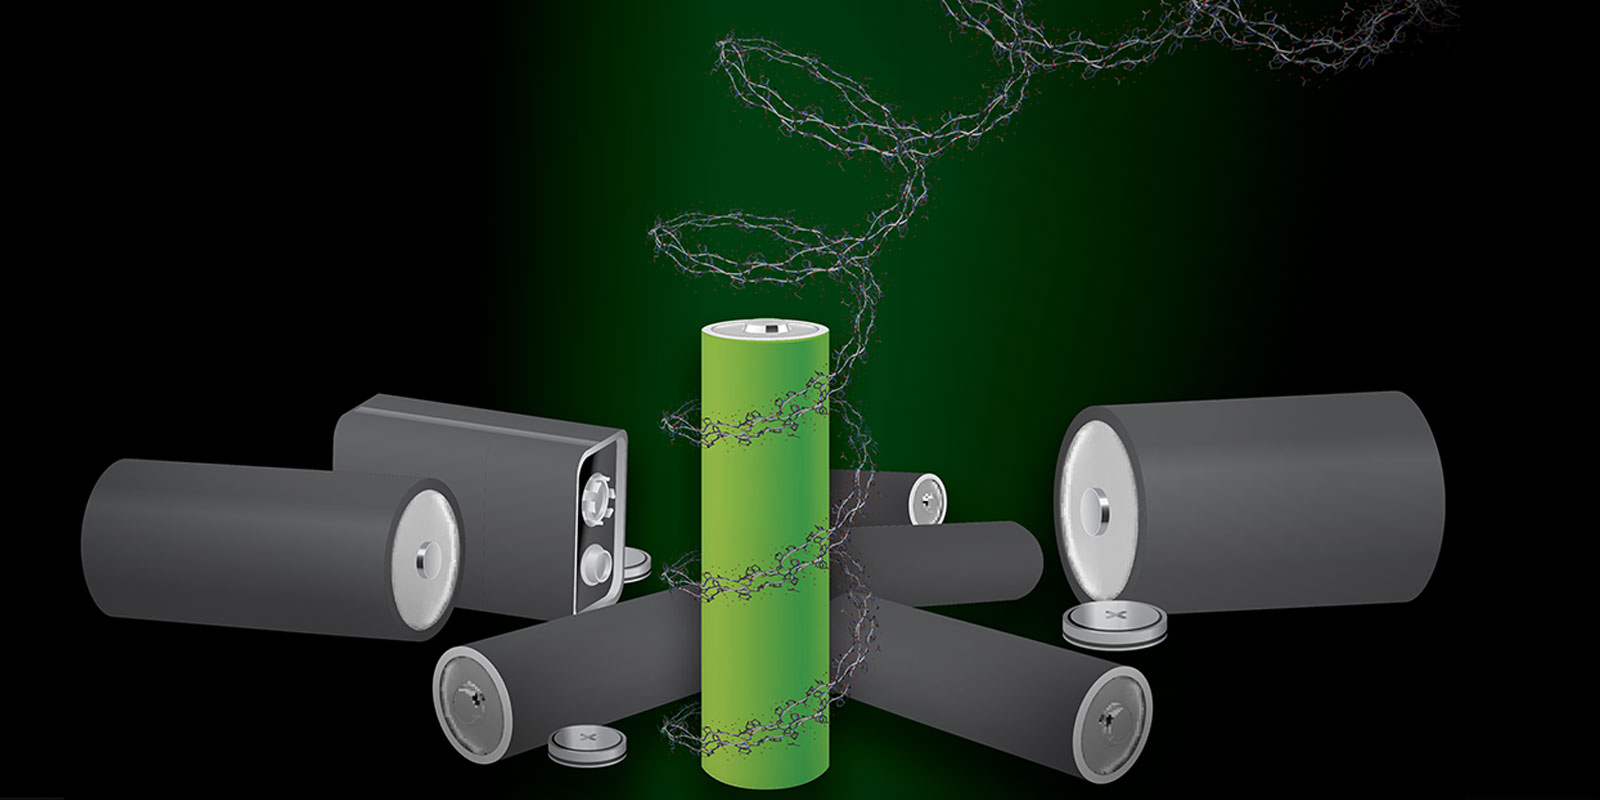 sustainable, recyclable batteries that minimize dependence on strategic metals.